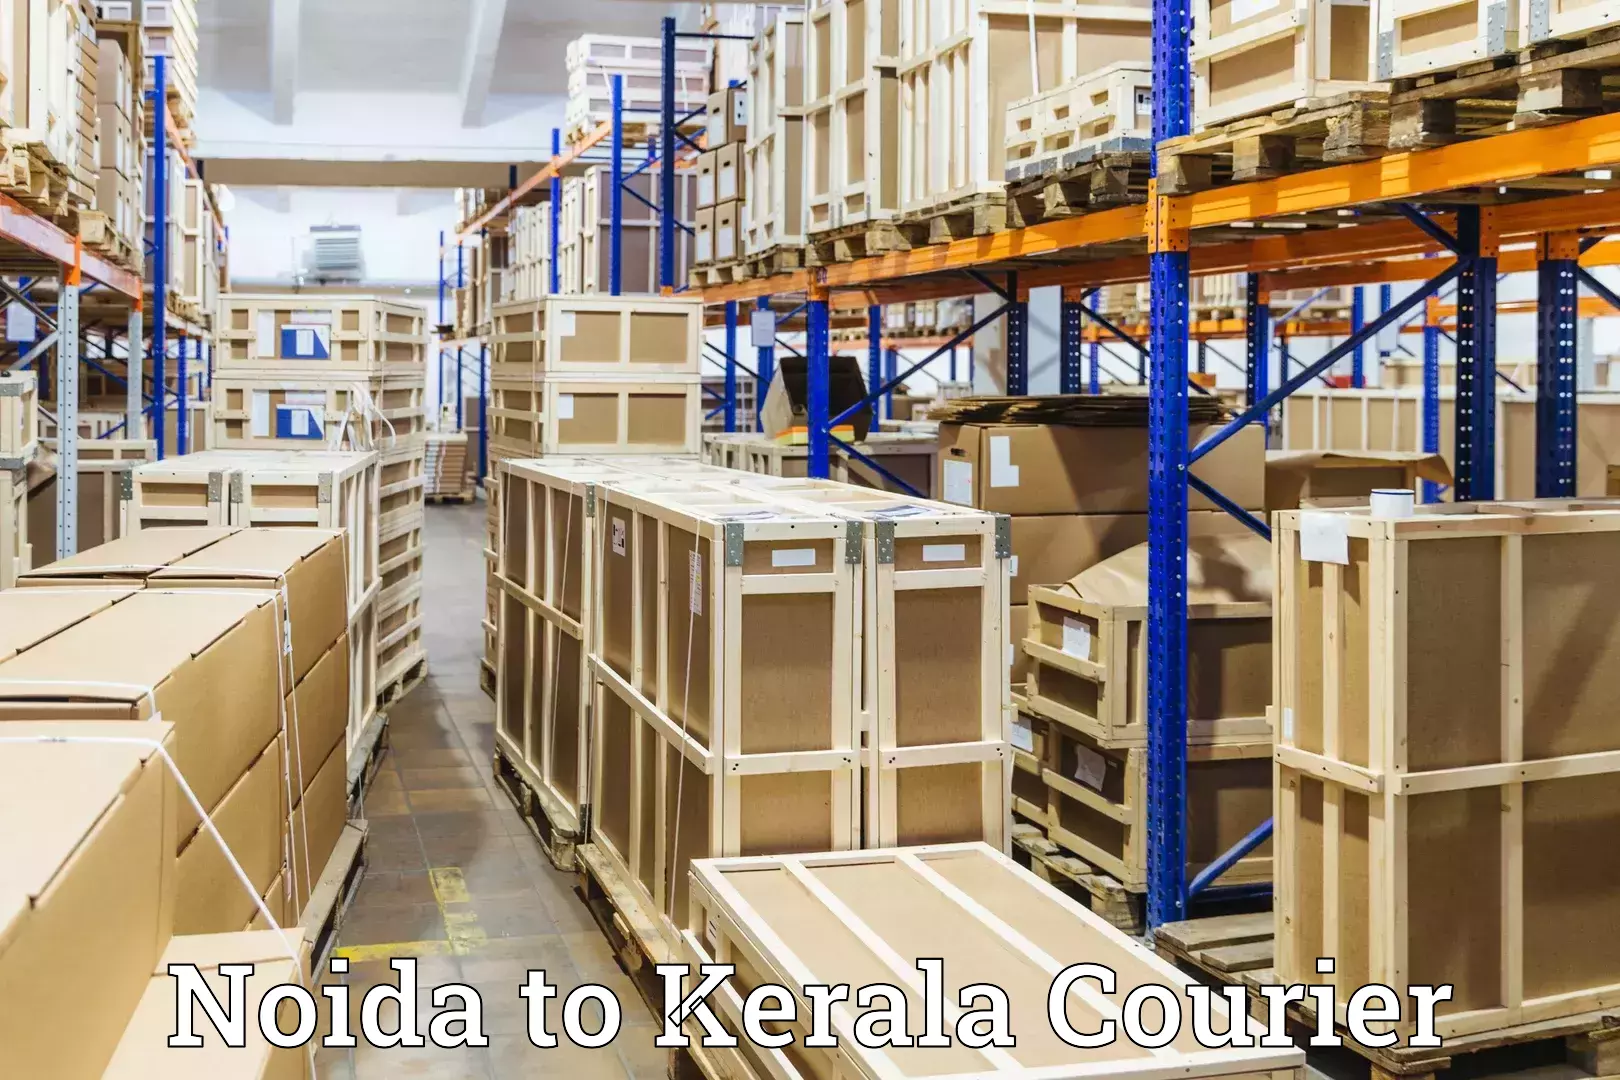 Instant baggage transport quote Noida to Kerala